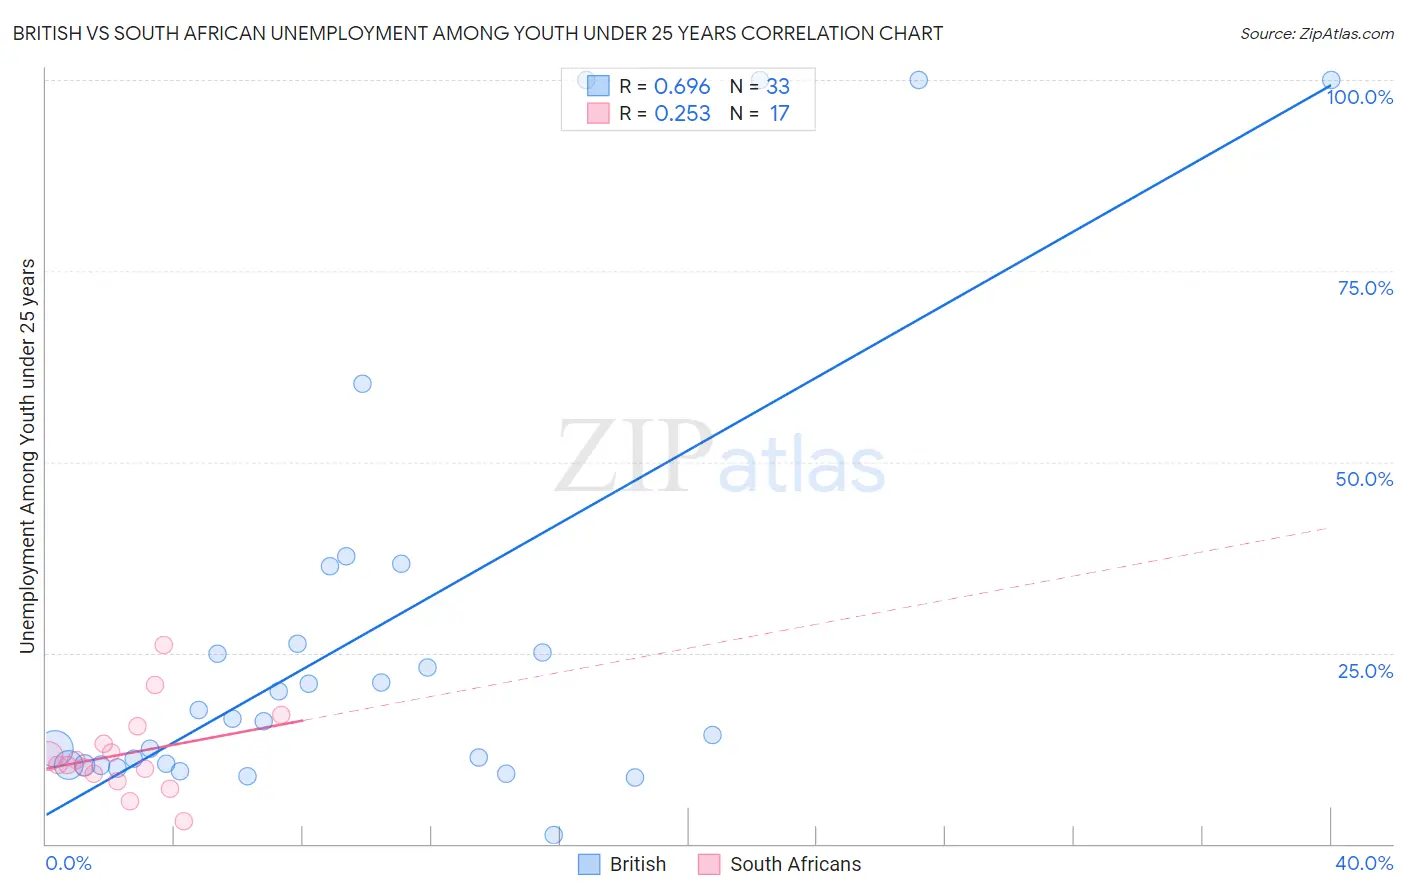 British vs South African Unemployment Among Youth under 25 years